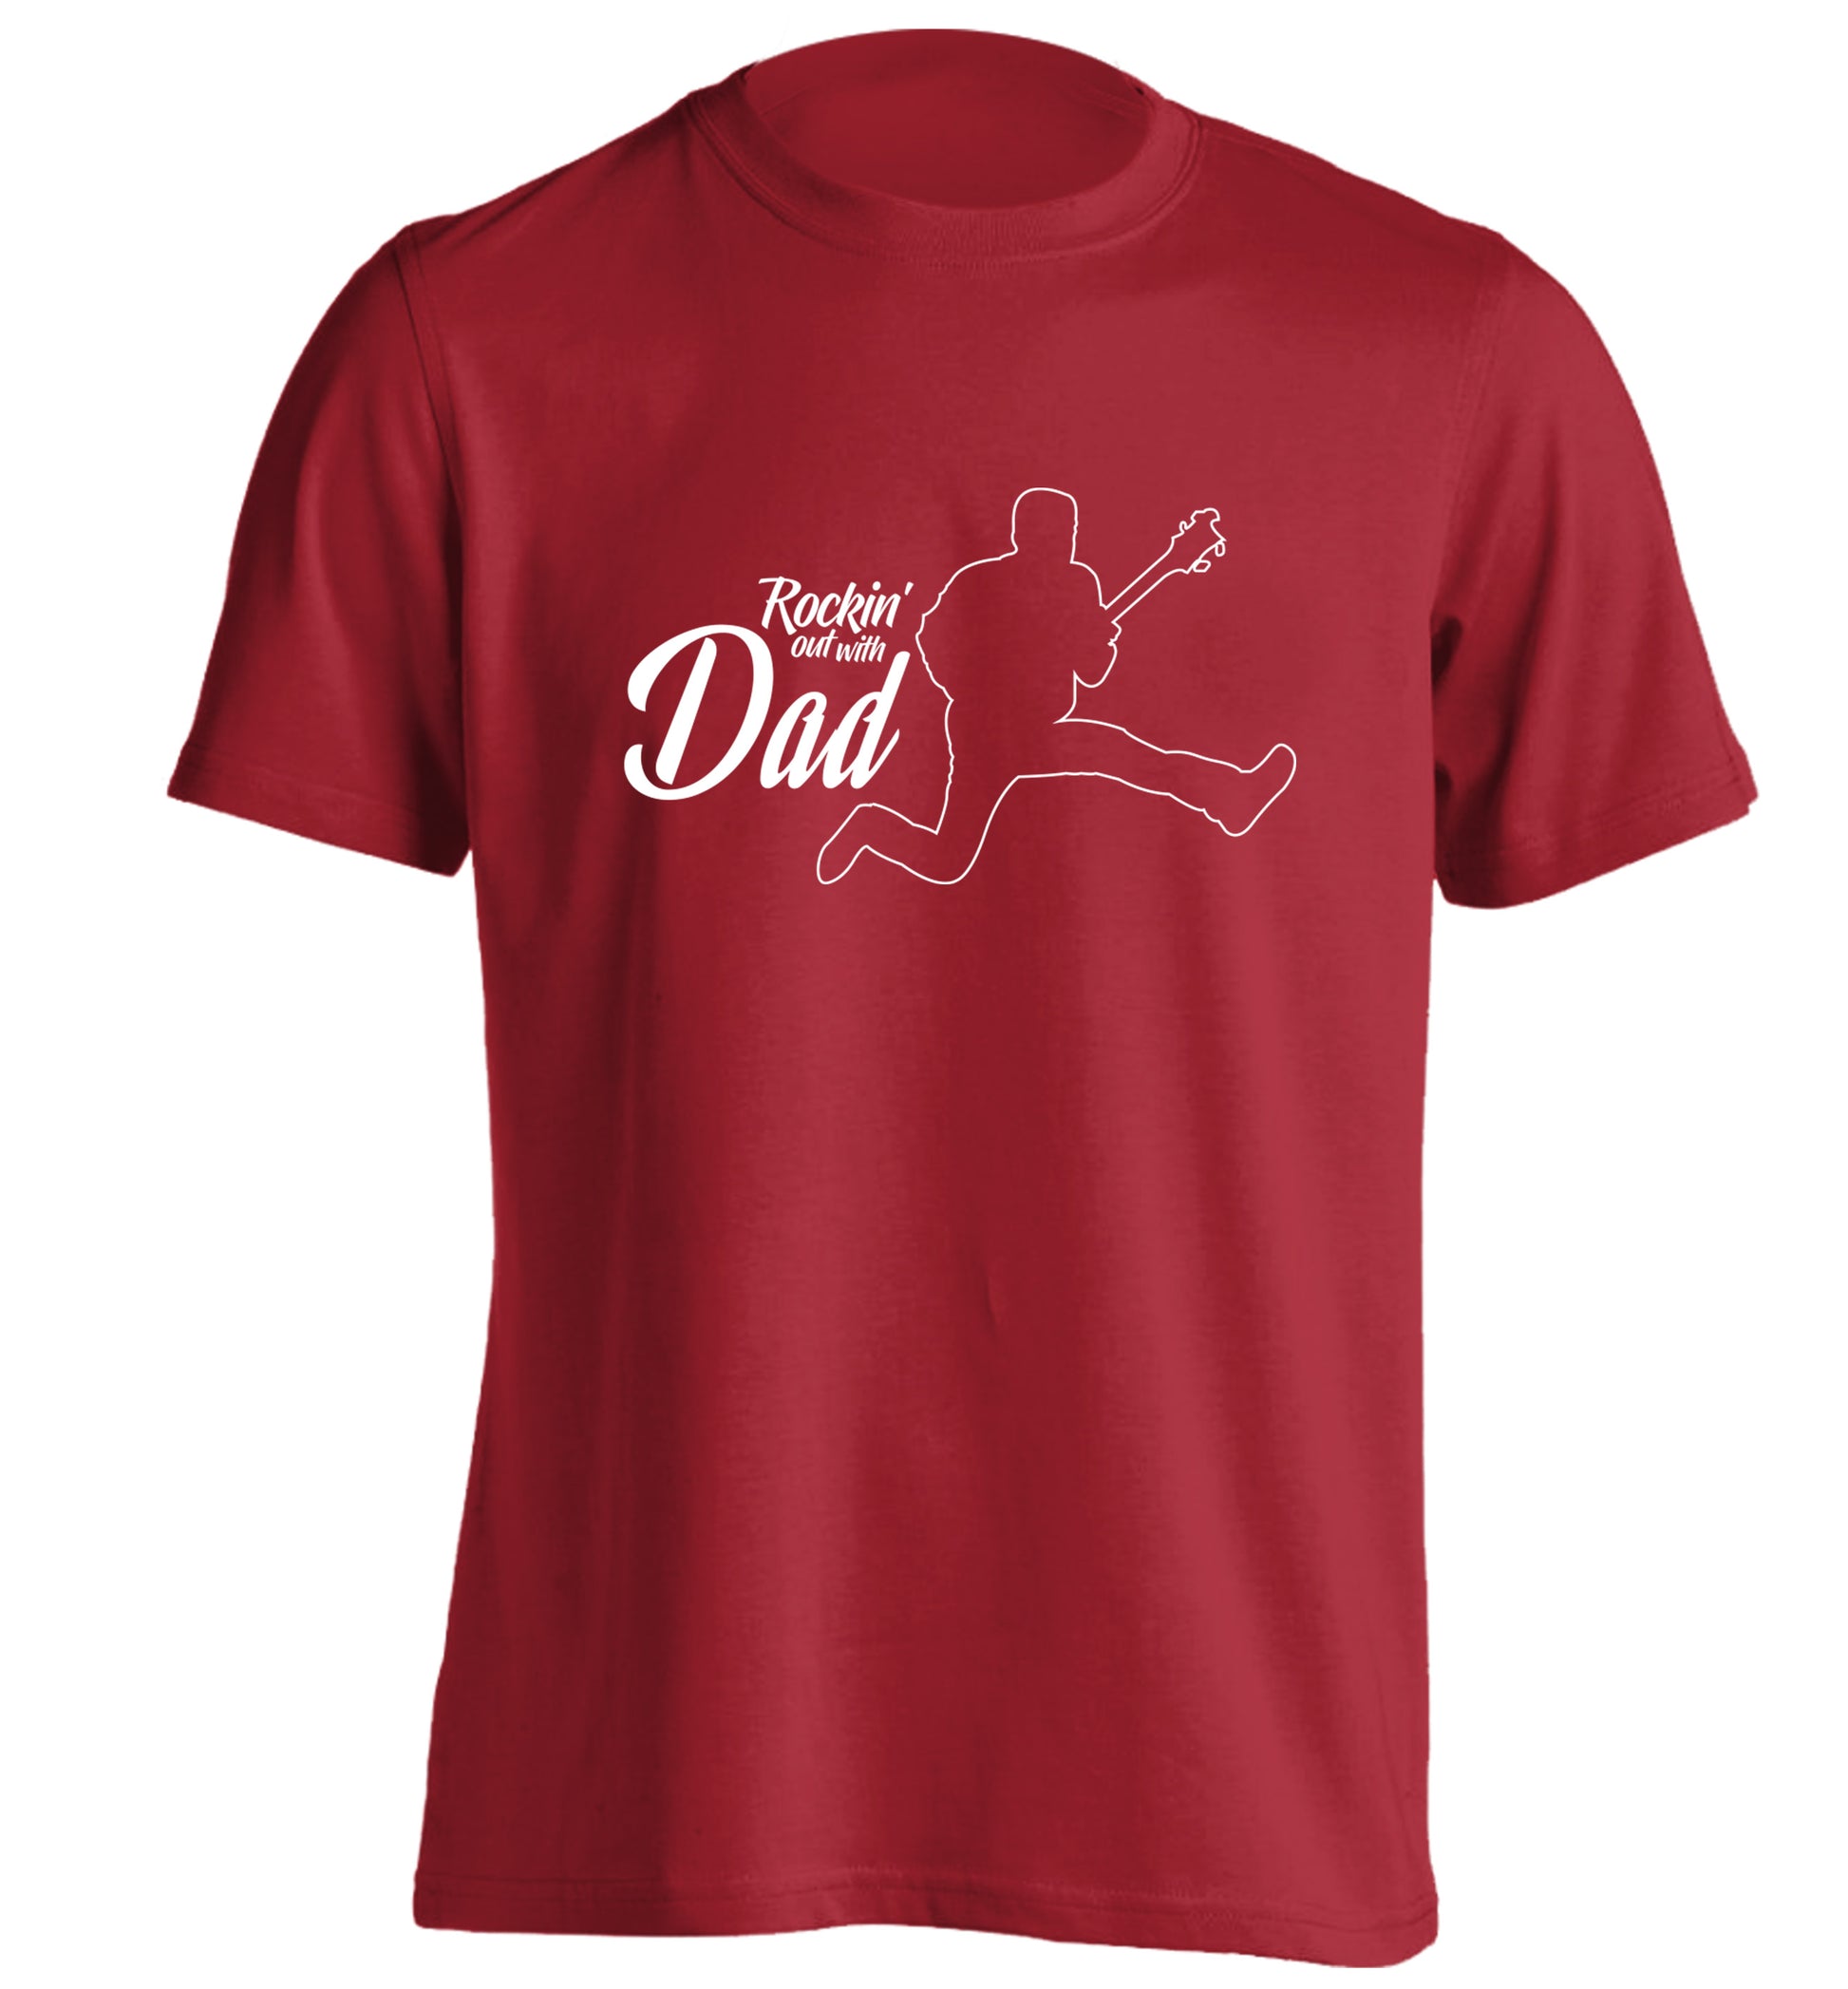 Rockin out with dad adults unisex red Tshirt 2XL